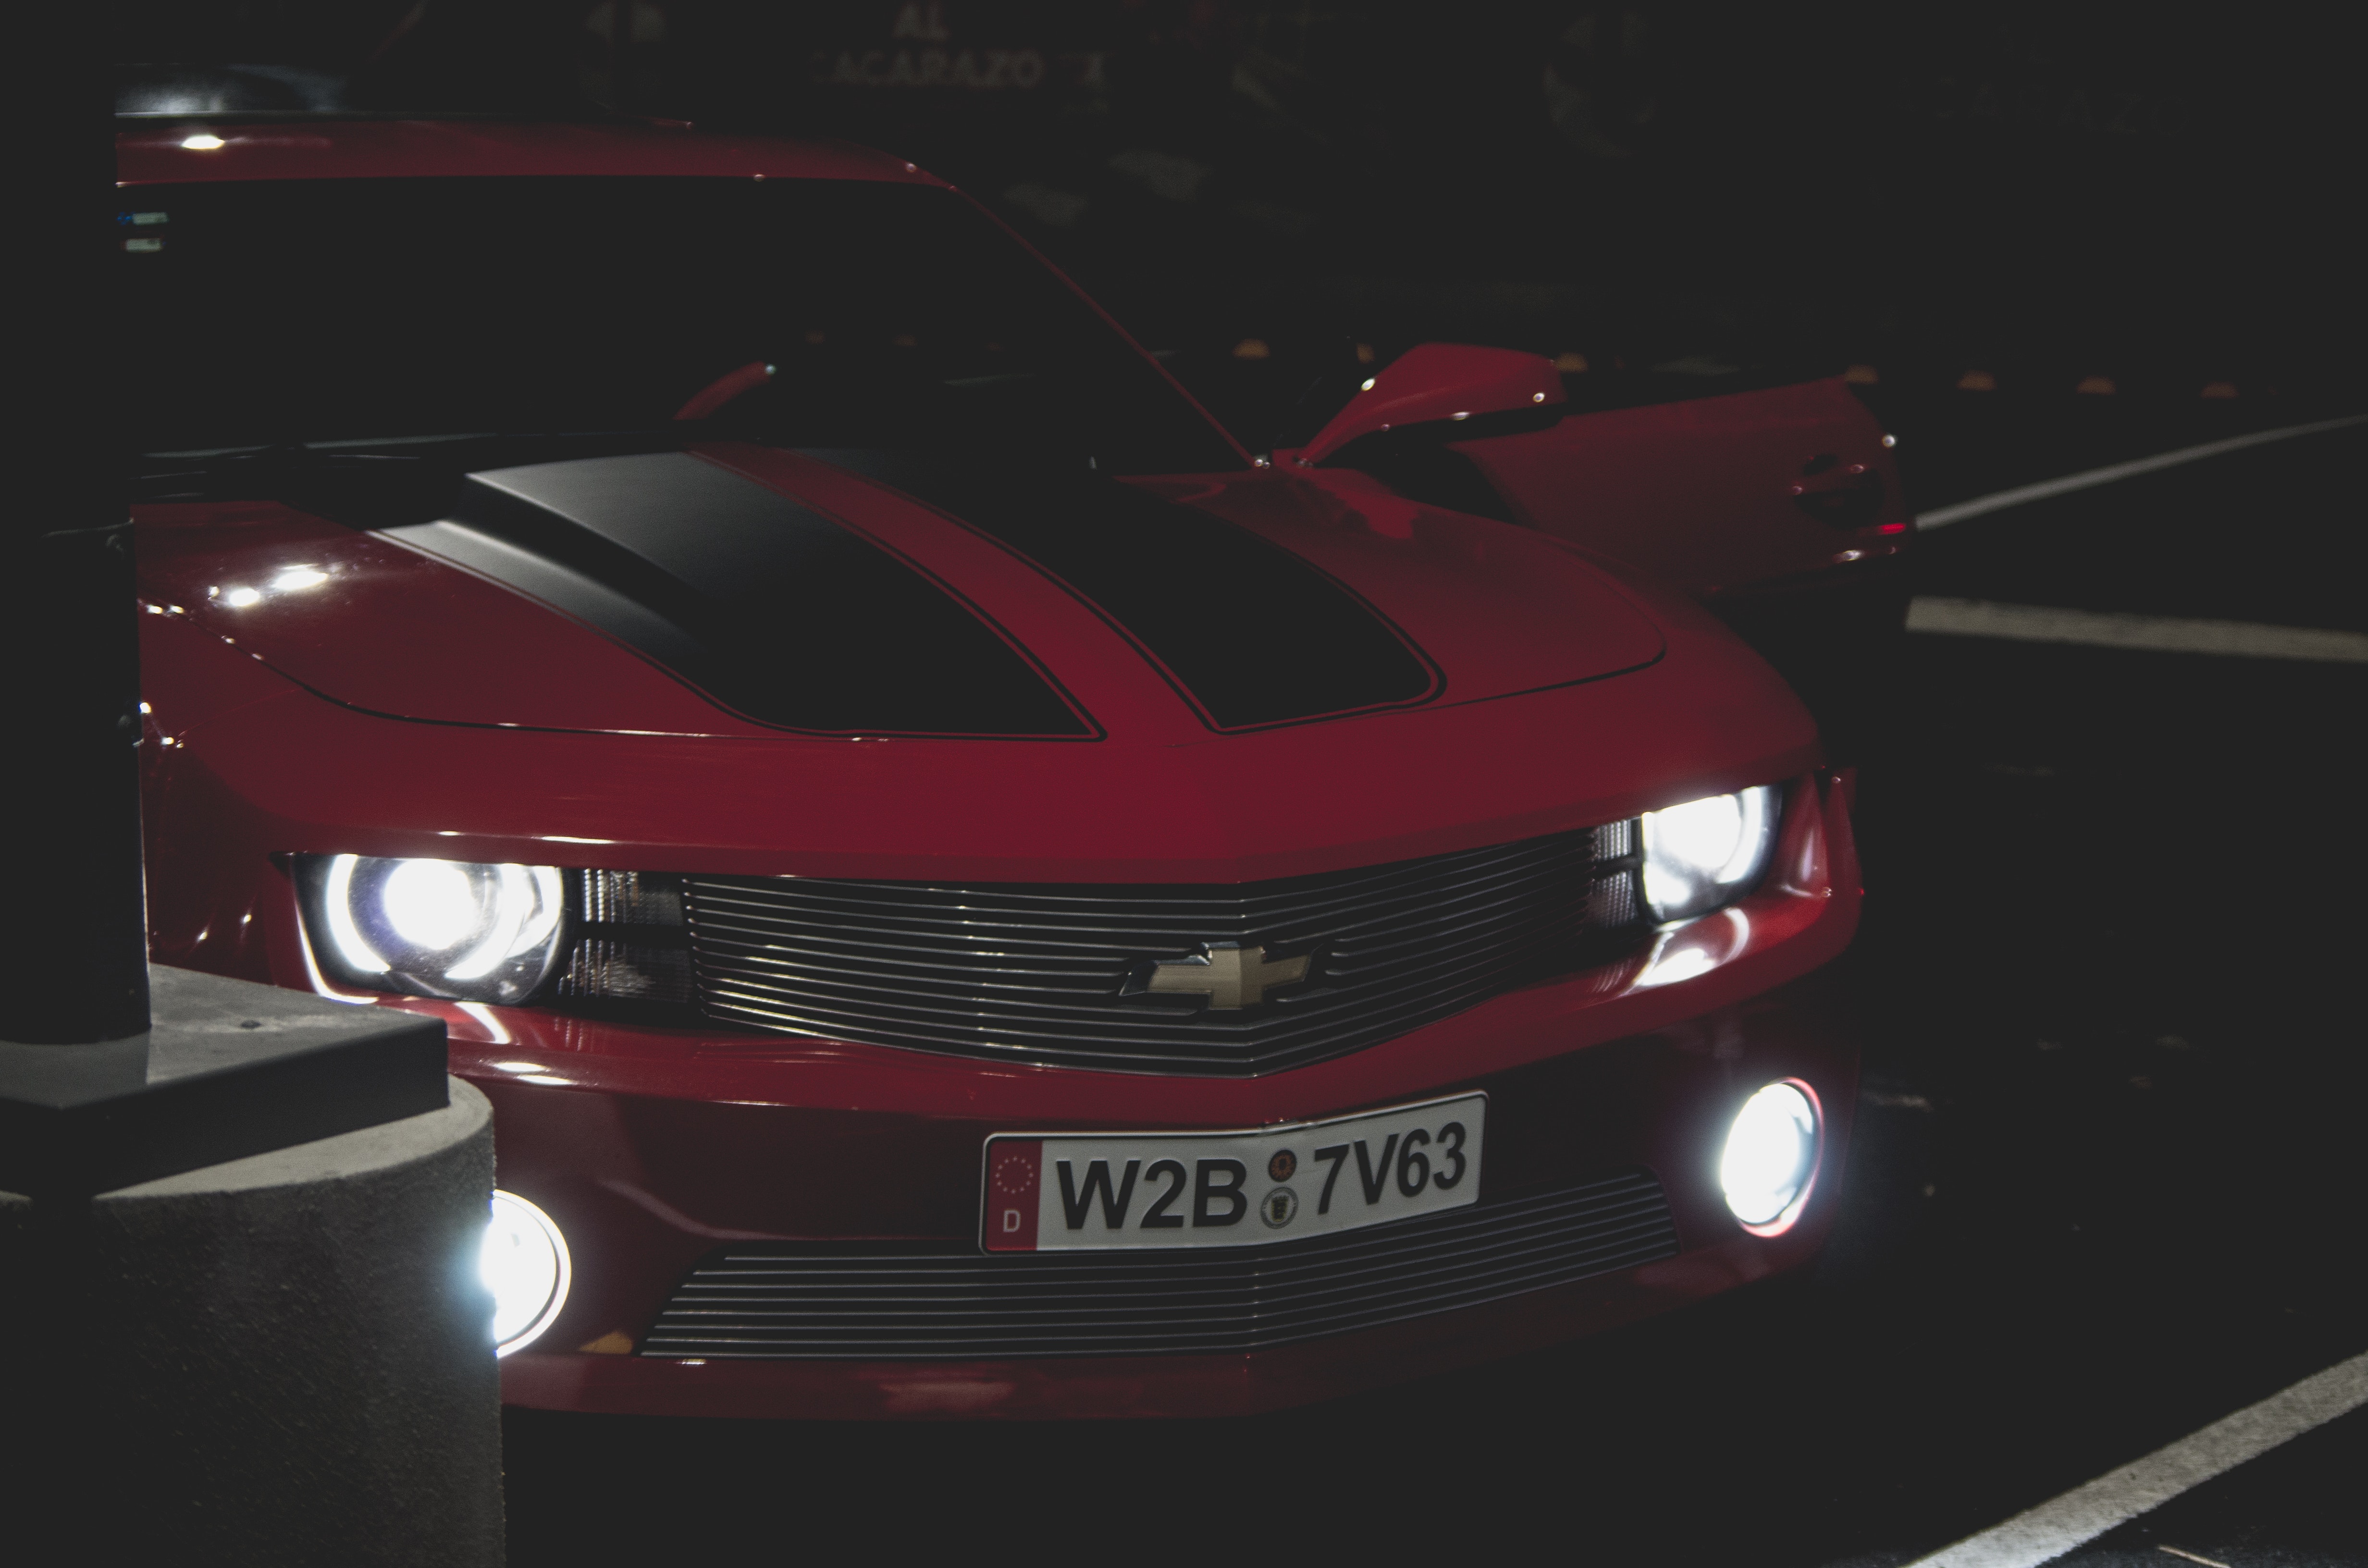 chevrolet camaro, cars, lights, front view, headlights, front bumper 2160p